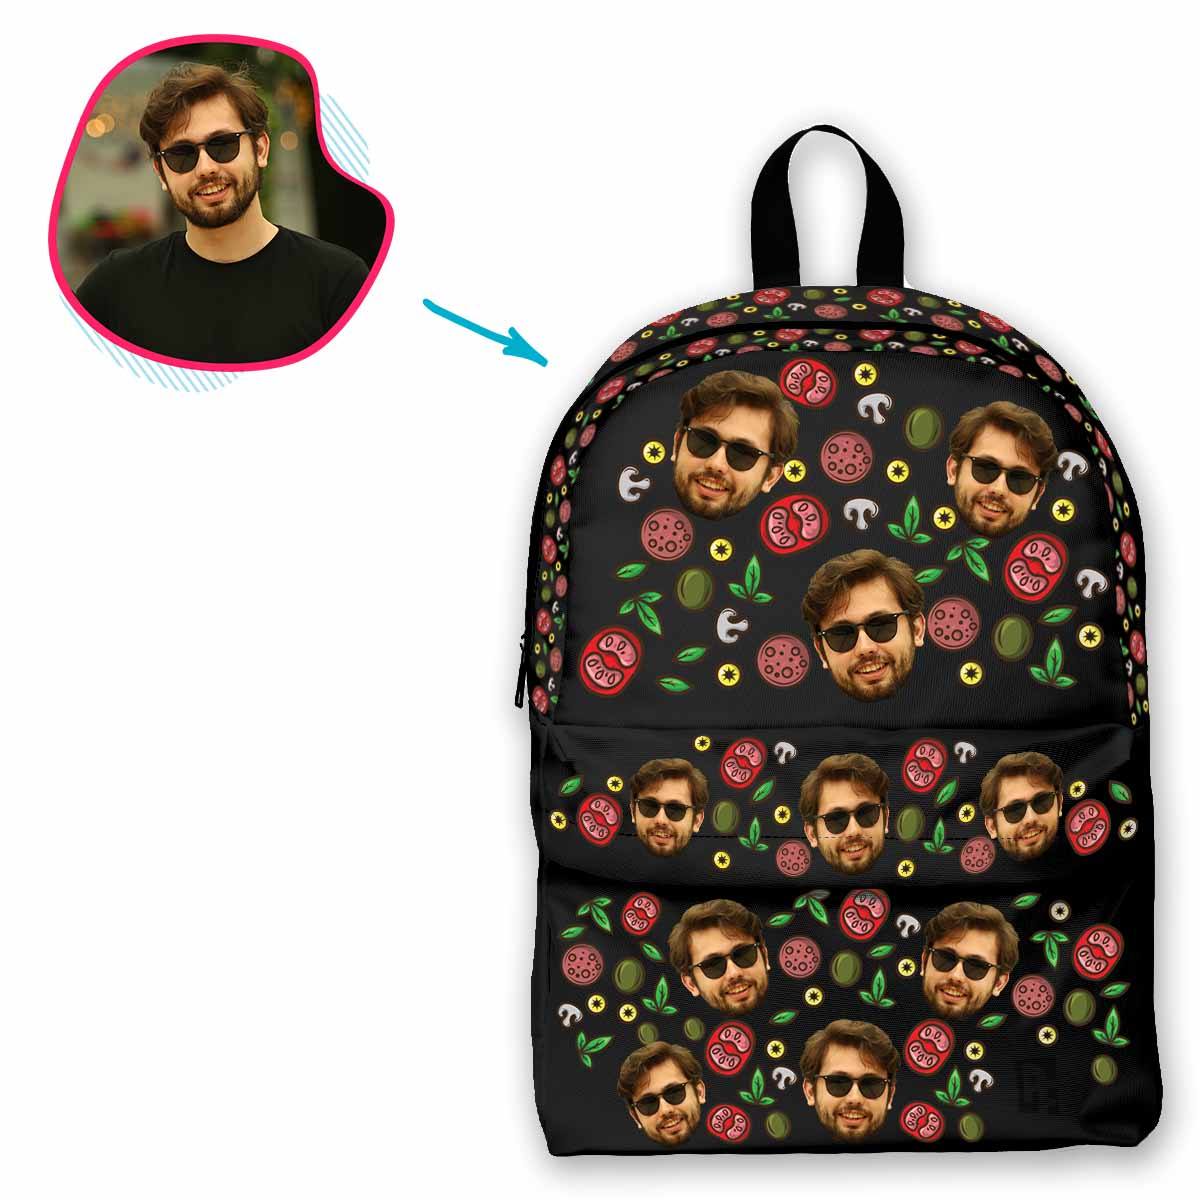 dark Pizza classic backpack personalized with photo of face printed on it